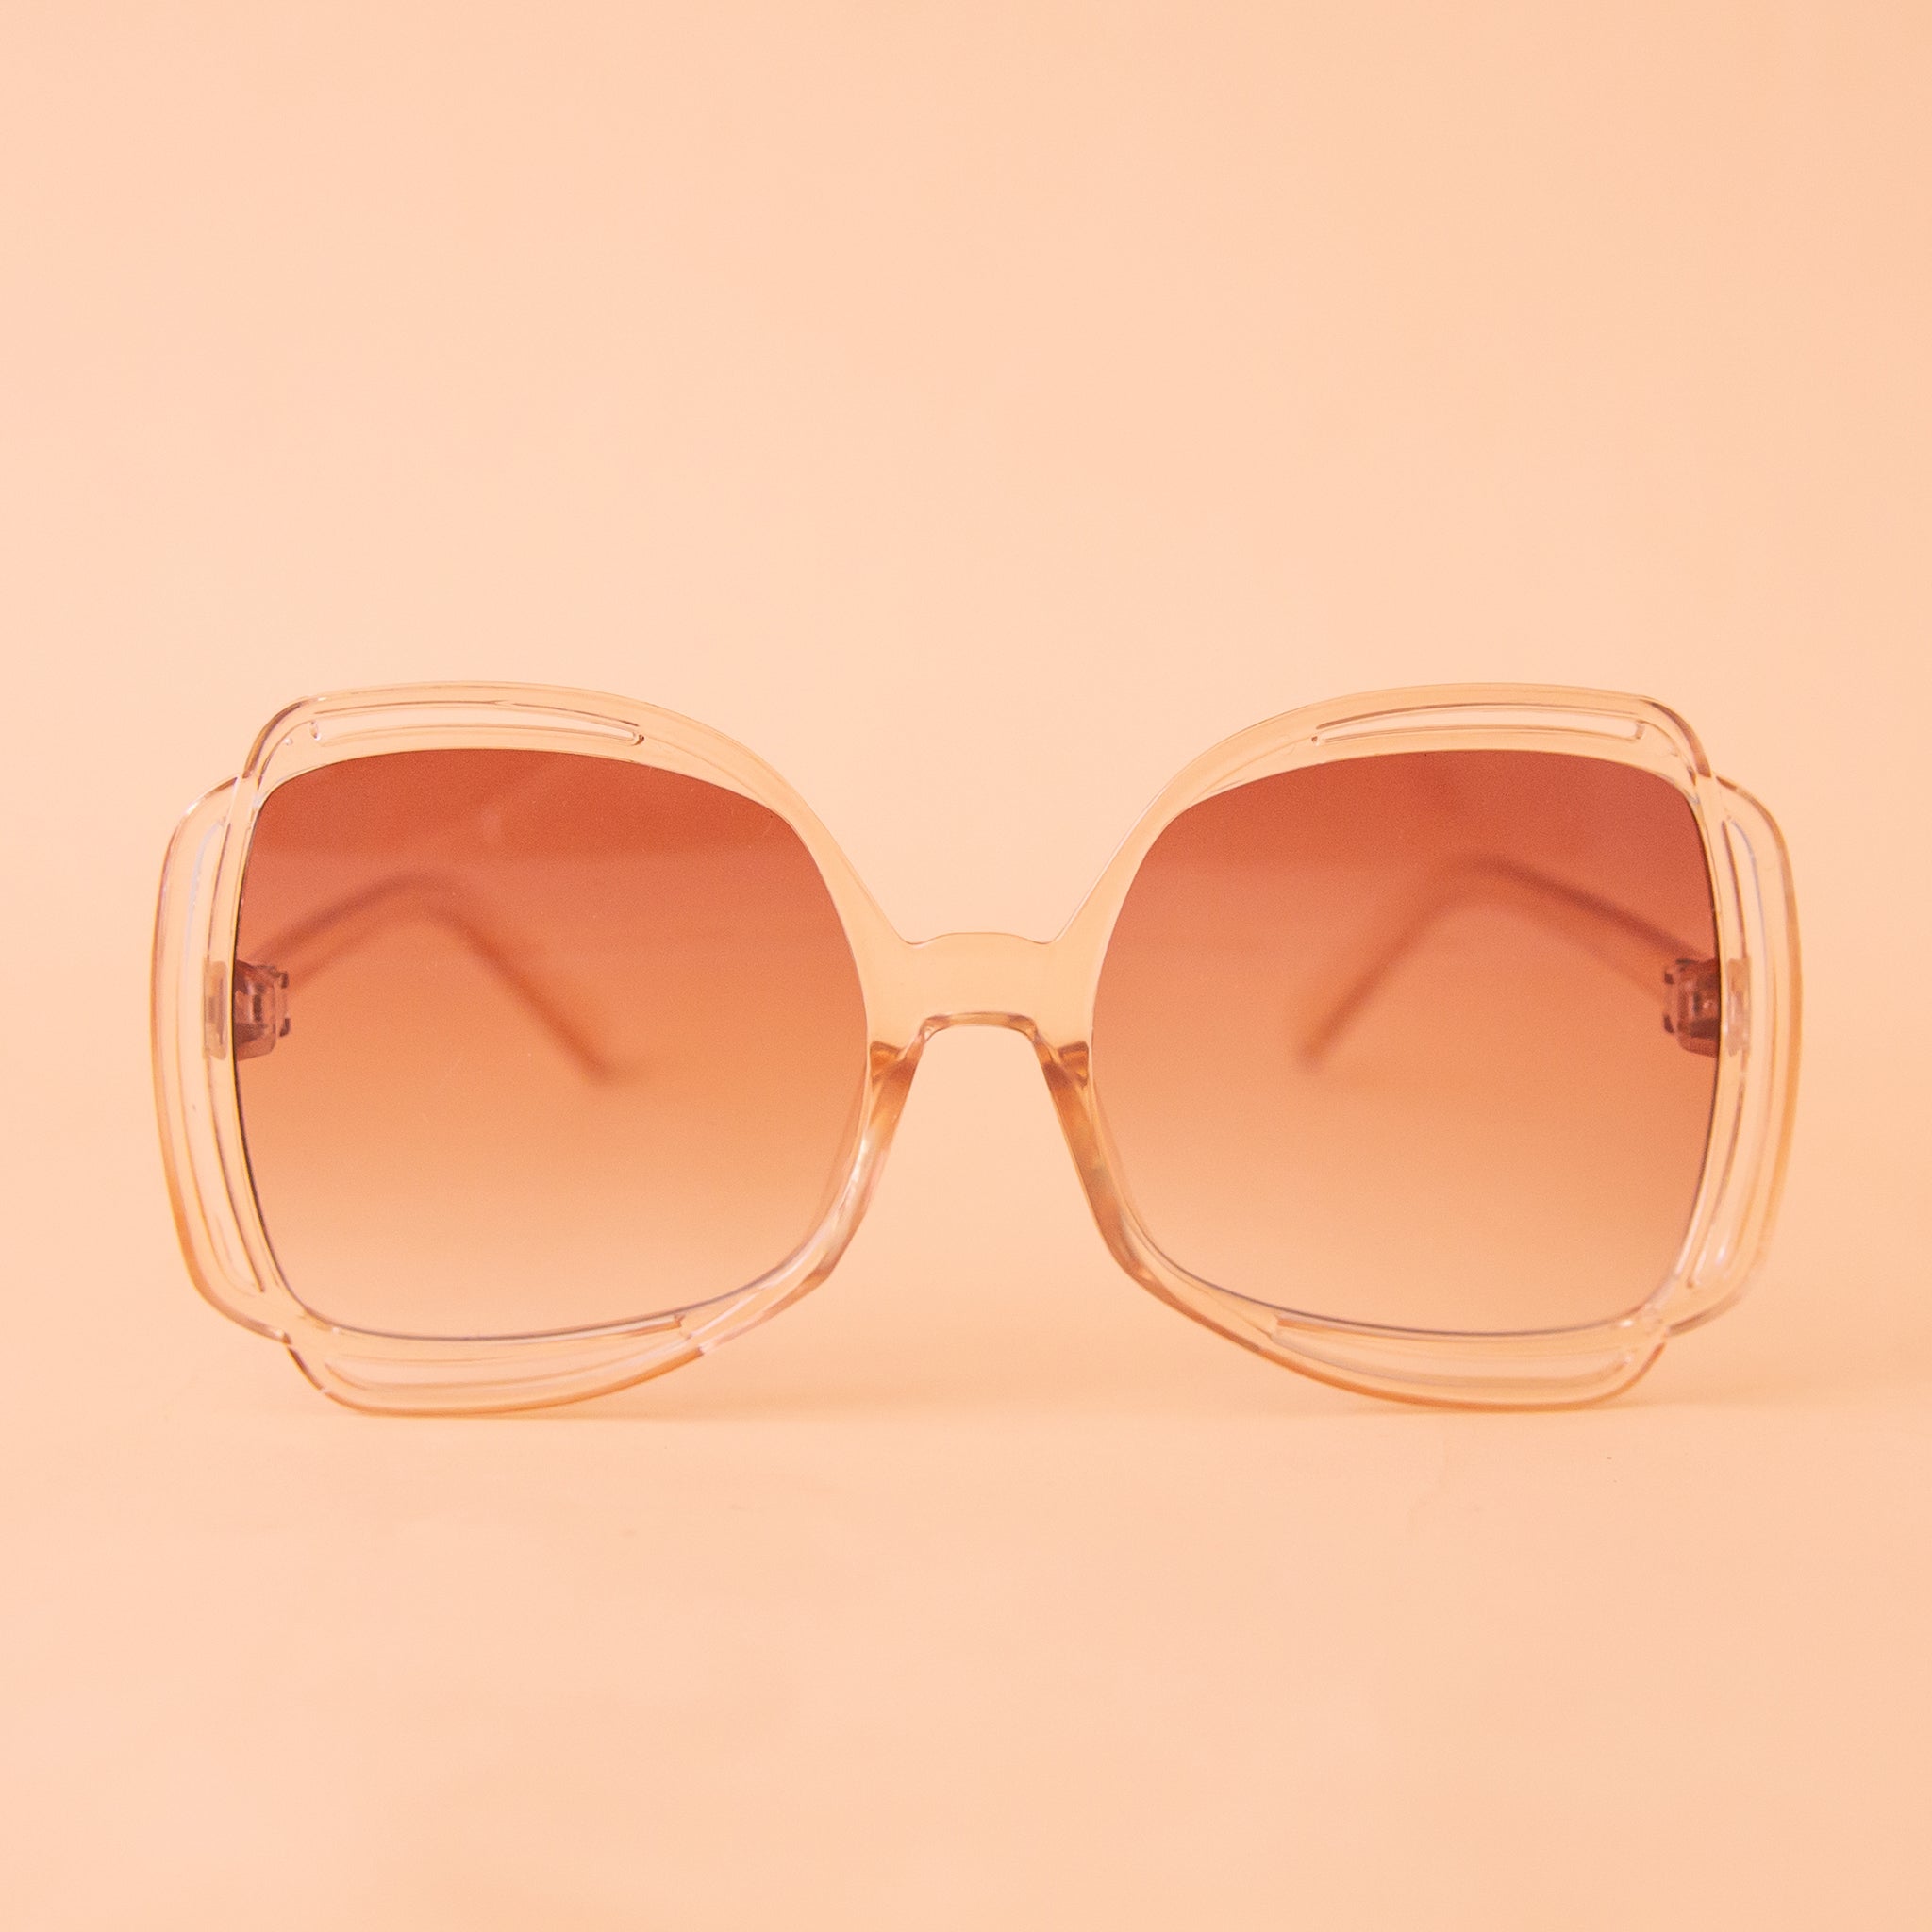 A pair of sunglasses with a clear peachy frame and pinkish gradient lenses.